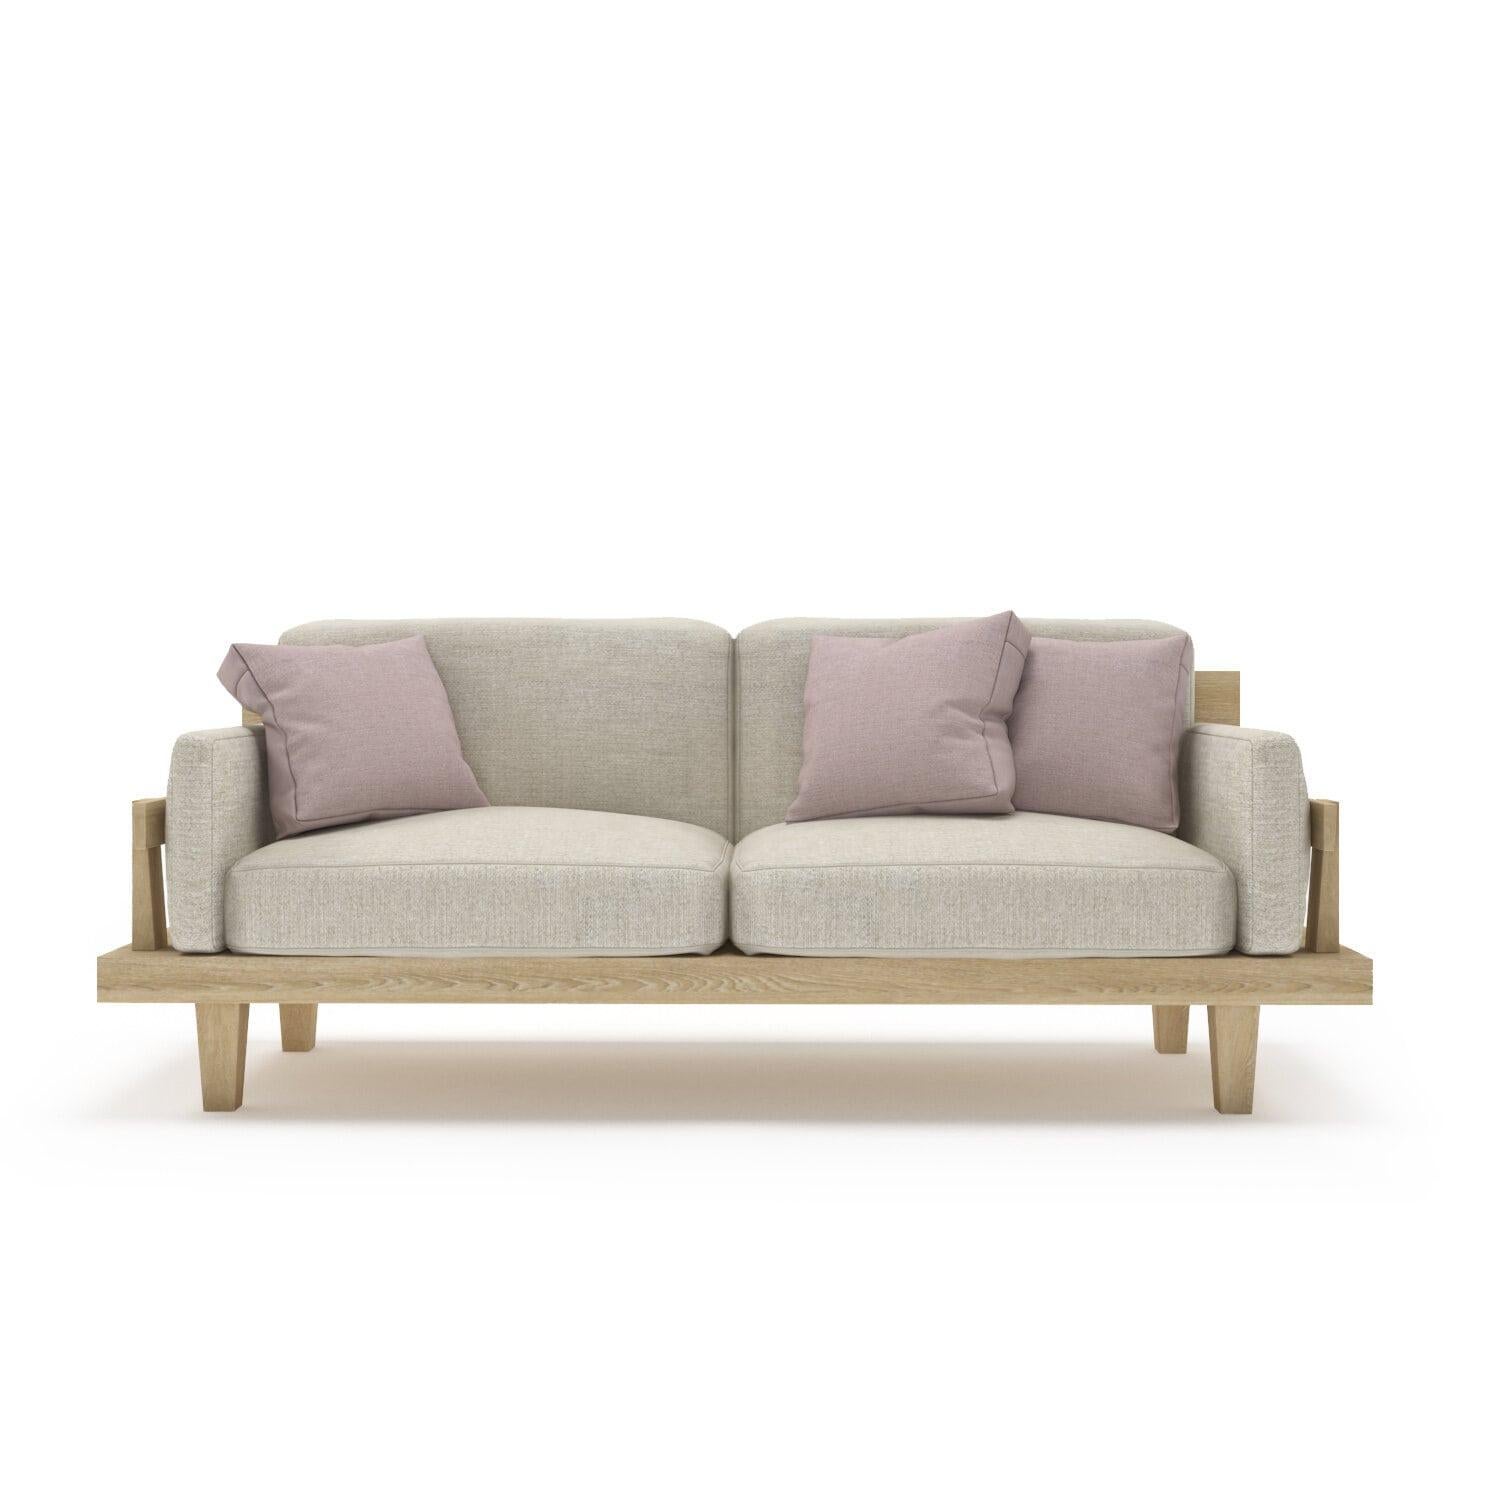 Introducing the Bengalo Sofa with its massive oak frame, lush cushions and supportive structure, you'll relish in cozy relaxation. Sink into the Bengalo and experience pure warmth and comfort!

All Tektōn pieces are made of natural massive